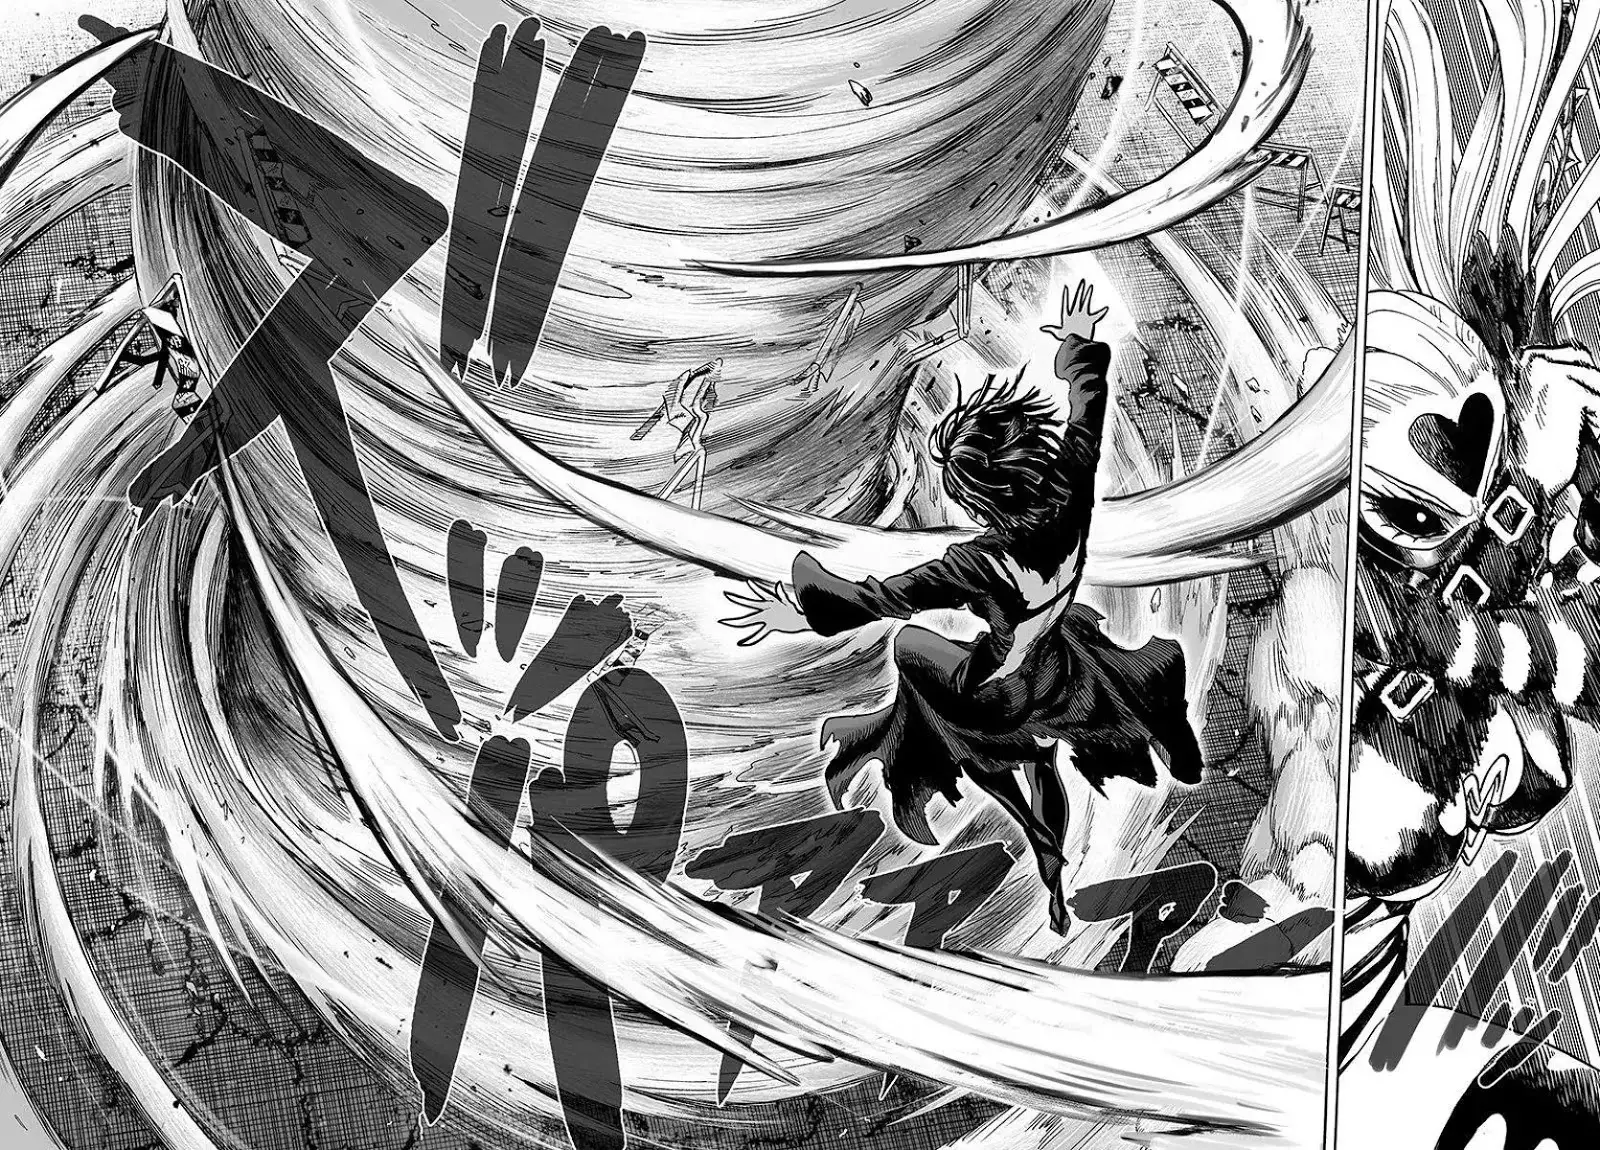 One Punch Man Chapter 65.1, READ One Punch Man Chapter 65.1 ONLINE, lost in the cloud genre,lost in the cloud gif,lost in the cloud girl,lost in the cloud goods,lost in the cloud goodreads,lost in the cloud,lost ark cloud gaming,lost odyssey cloud gaming,lost in the cloud fanart,lost in the cloud fanfic,lost in the cloud fandom,lost in the cloud first kiss,lost in the cloud font,lost in the cloud ending,lost in the cloud episode 97,lost in the cloud edit,lost in the cloud explained,lost in the cloud dog,lost in the cloud discord server,lost in the cloud desktop wallpaper,lost in the cloud drawing,can't find my cloud on network,lost in the cloud characters,lost in the cloud chapter 93 release date,lost in the cloud birthday,lost in the cloud birthday art,lost in the cloud background,lost in the cloud banner,lost in the clouds meaning,what is the black cloud in lost,lost in the cloud ao3,lost in the cloud anime,lost in the cloud art,lost in the cloud author twitter,lost in the cloud author instagram,lost in the cloud artist,lost in the cloud acrylic stand,lost in the cloud artist twitter,lost in the cloud art style,lost in the cloud analysis